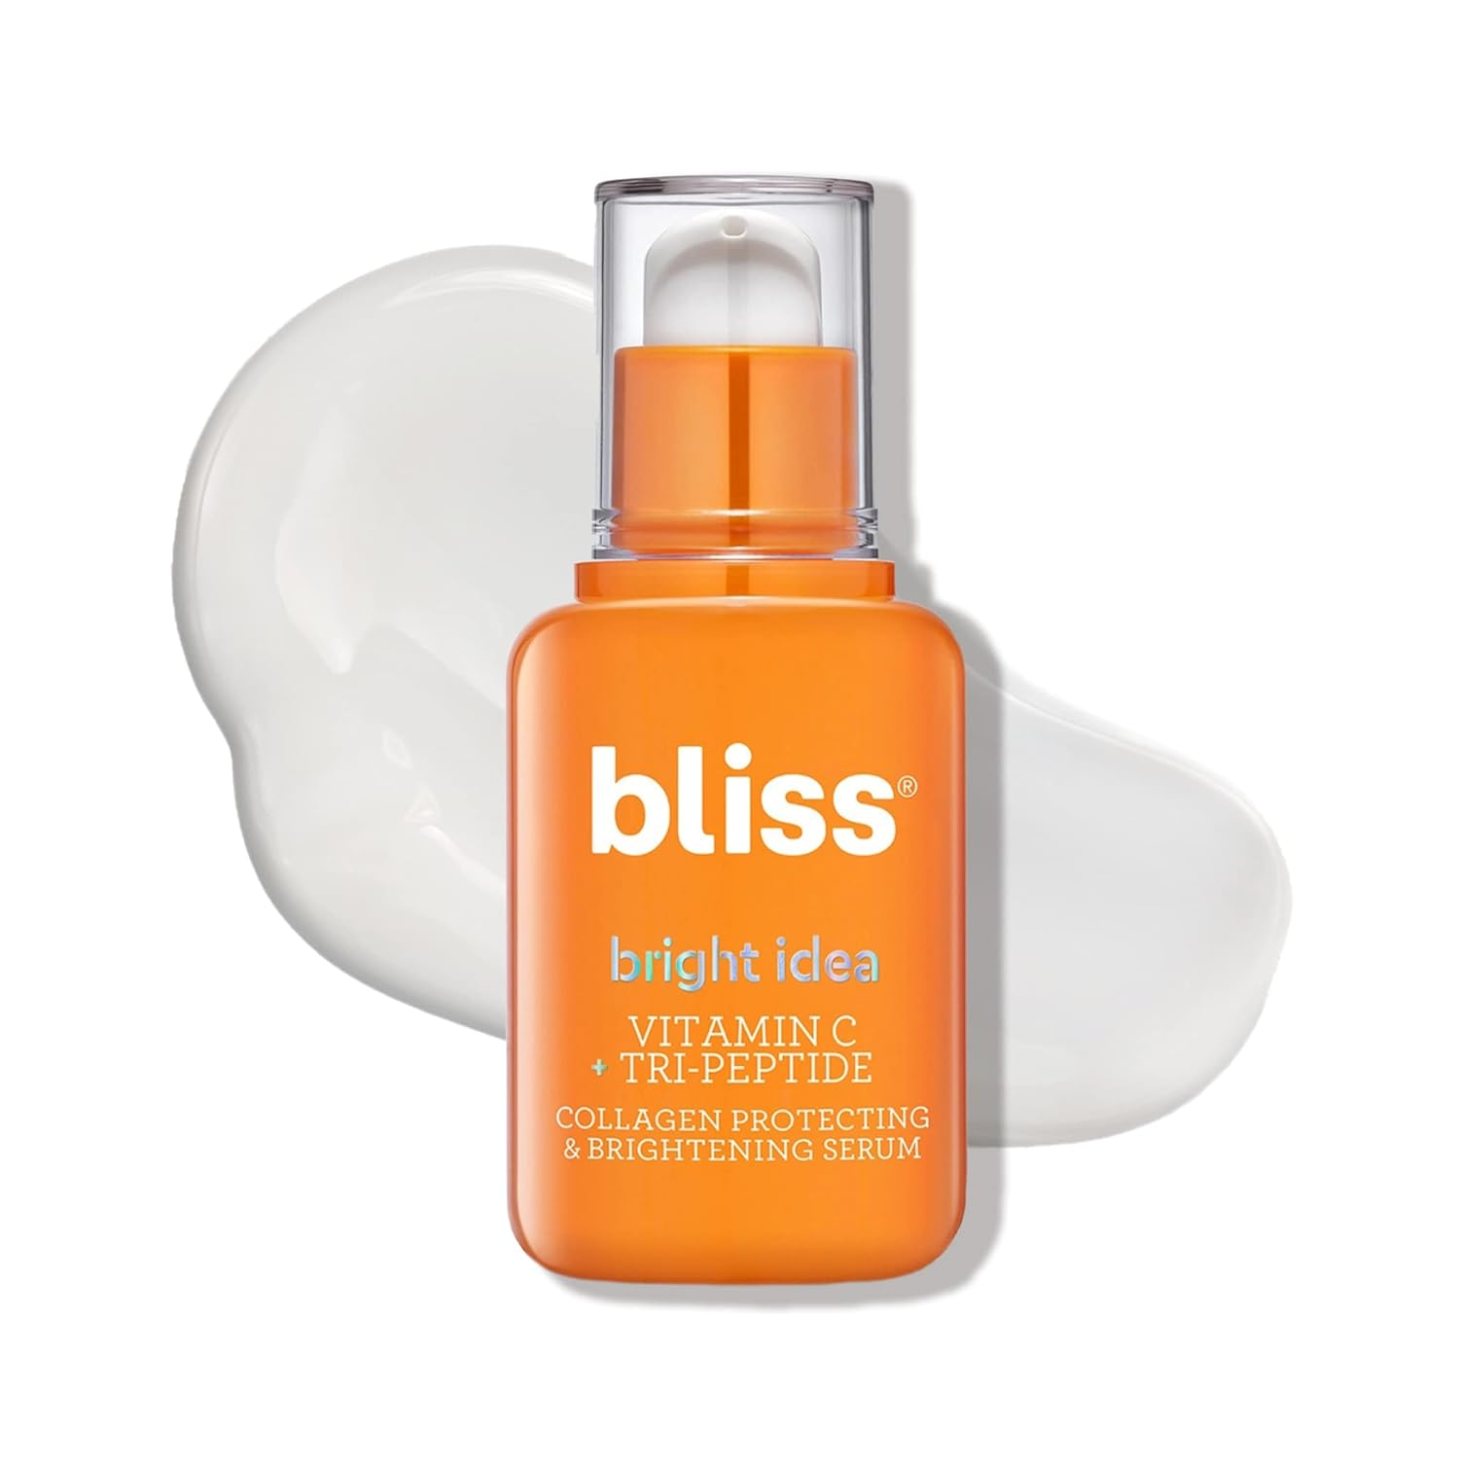 bliss vitamin c serum, one of the best vitamin c skincare products